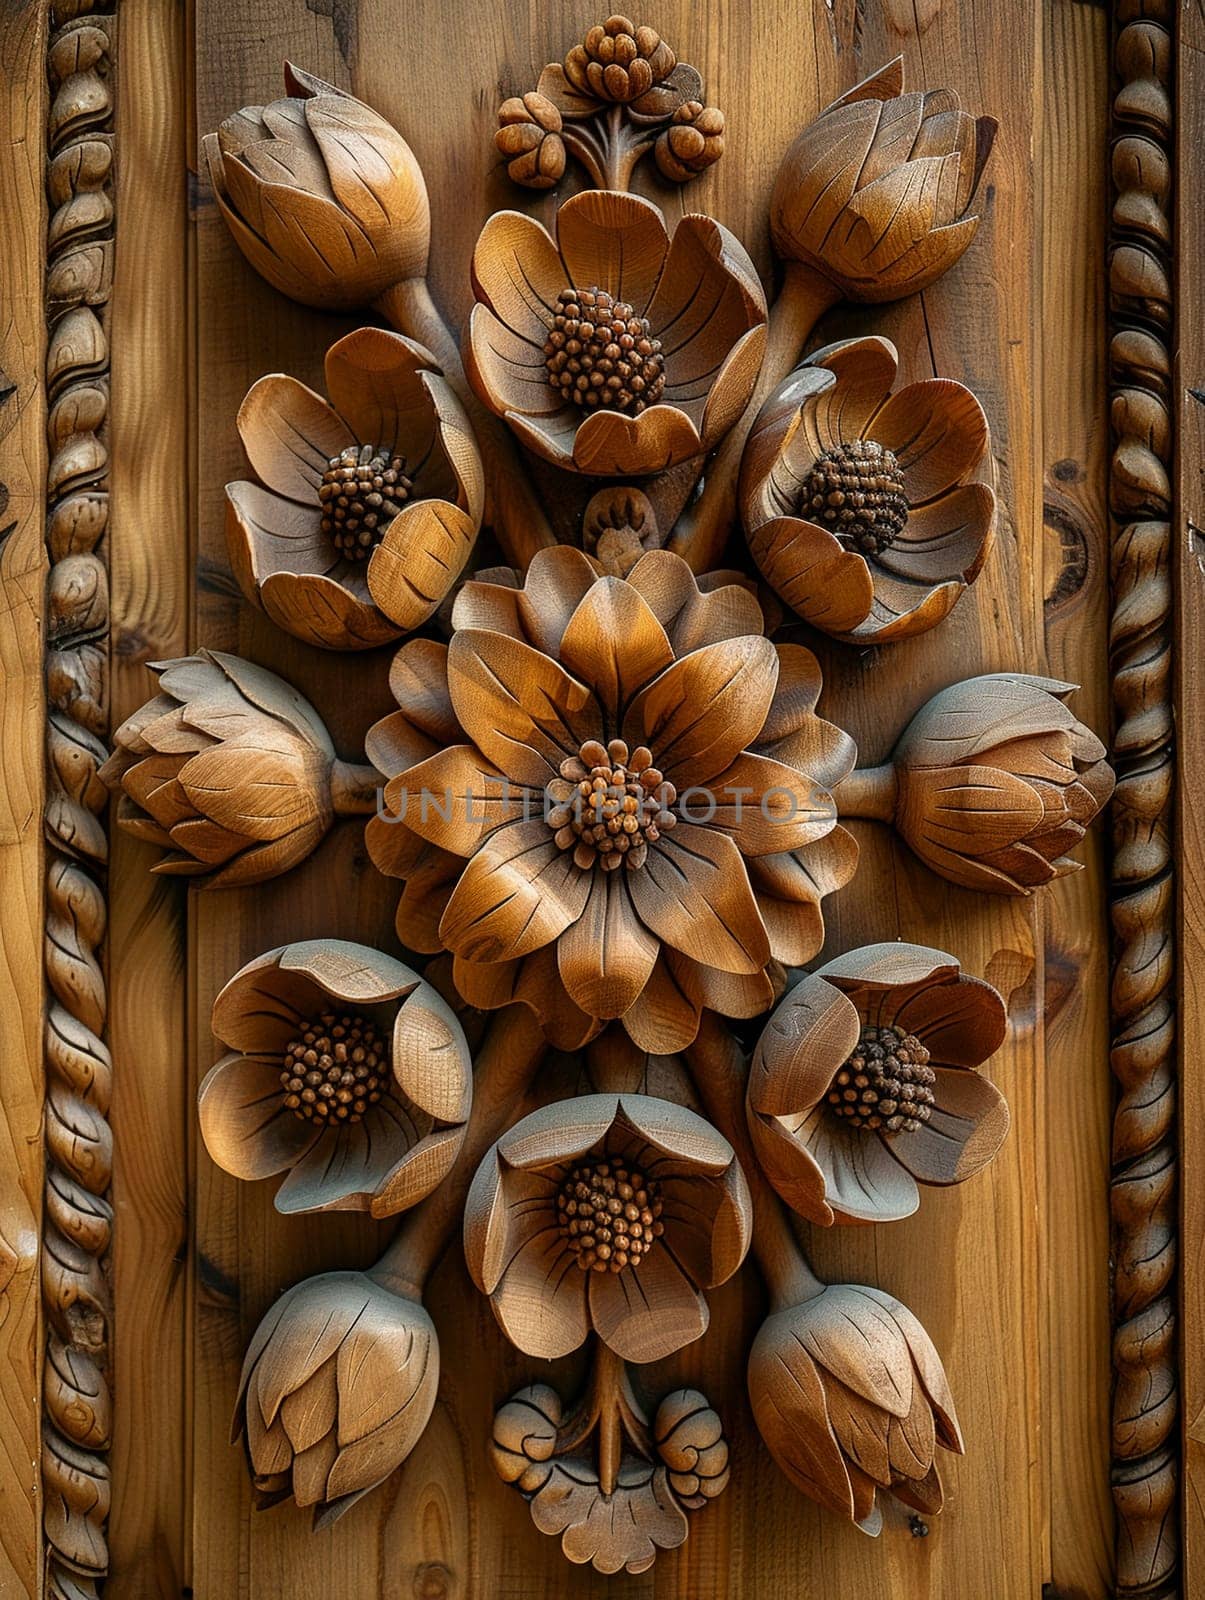 Wooden surface with intricate carvings, illustrating craftsmanship and artistry.